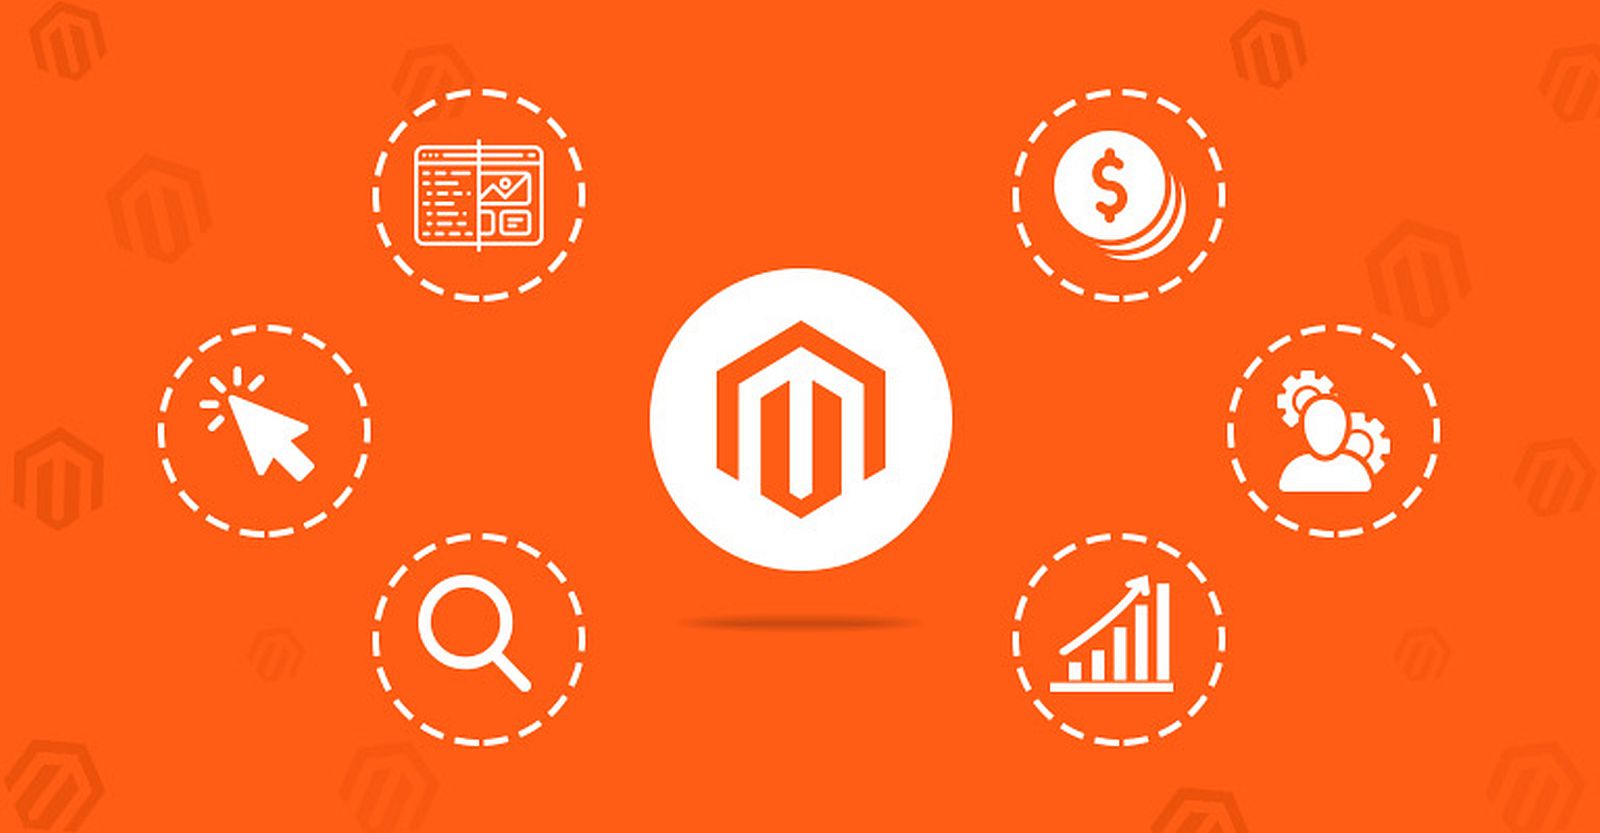 Basic concept about Magento and benefit for eCommerce businesses